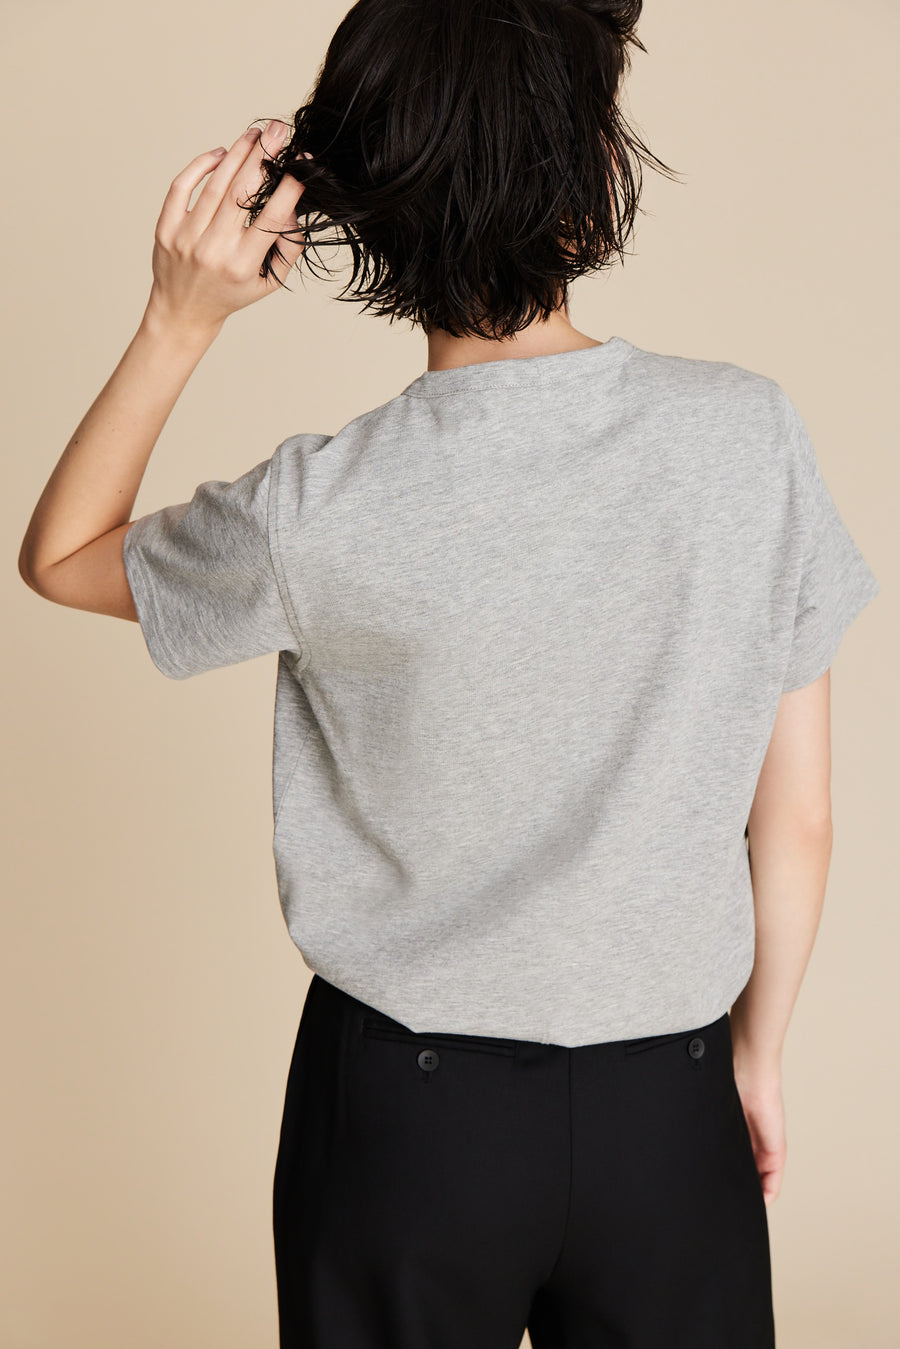 NYC – Heather The Out Sold in Grey Iconically Tee Perfect Soft